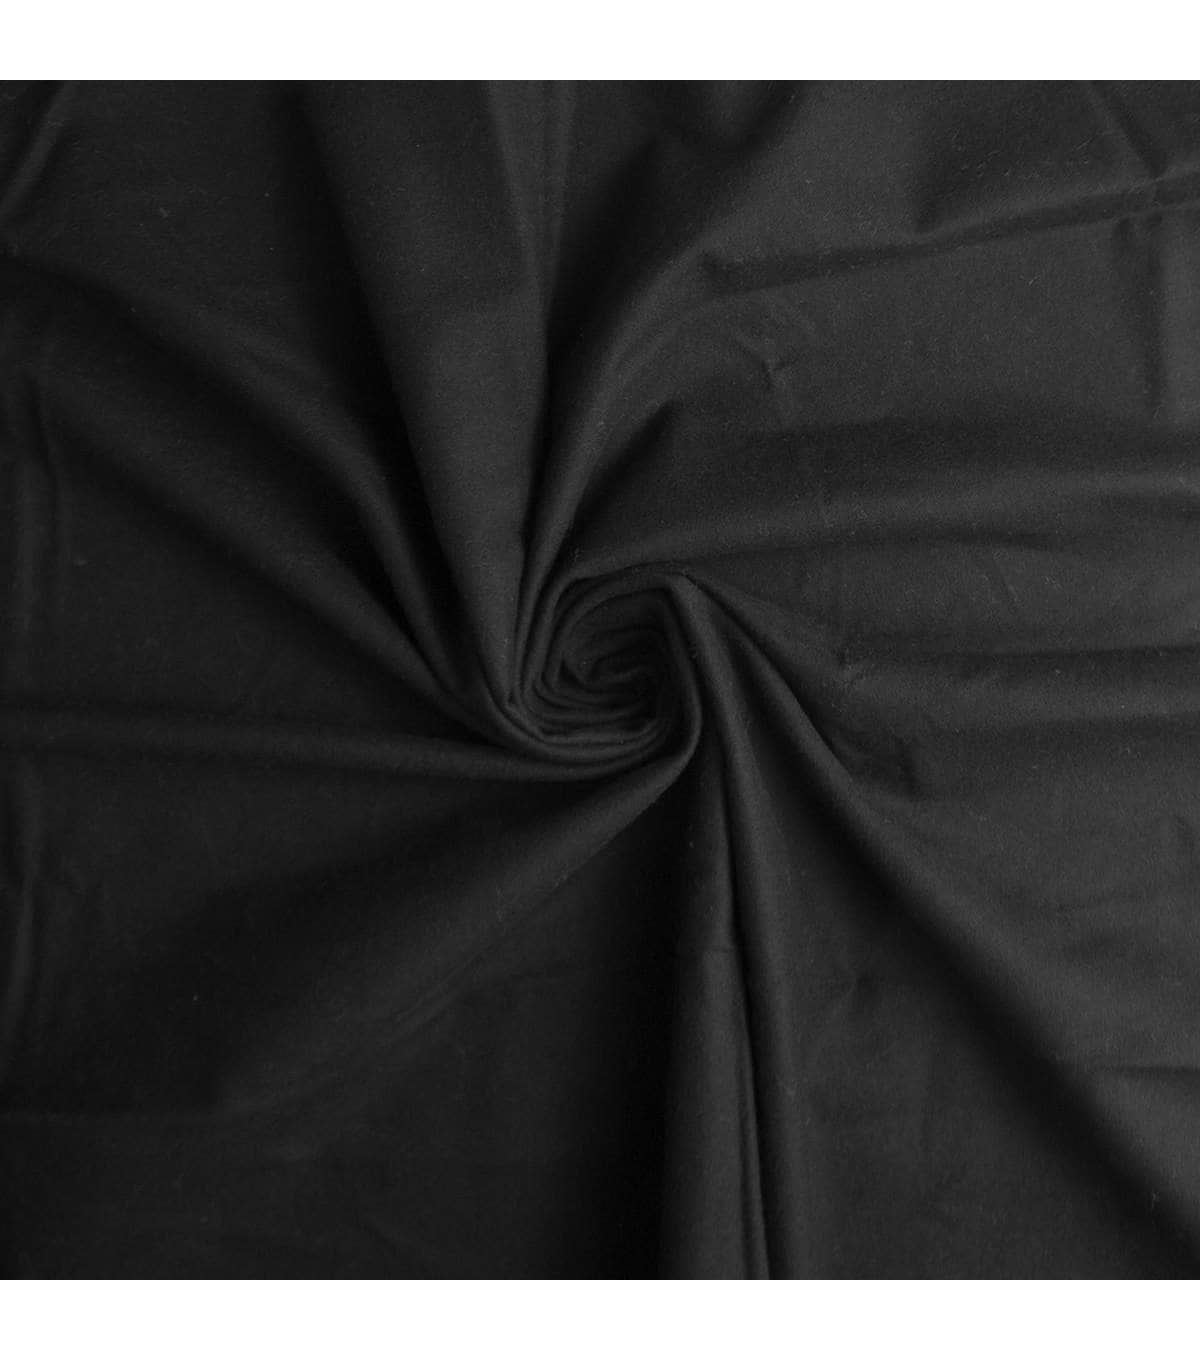 Black Solid, FLANNEL Fabric by the Yard - Etsy